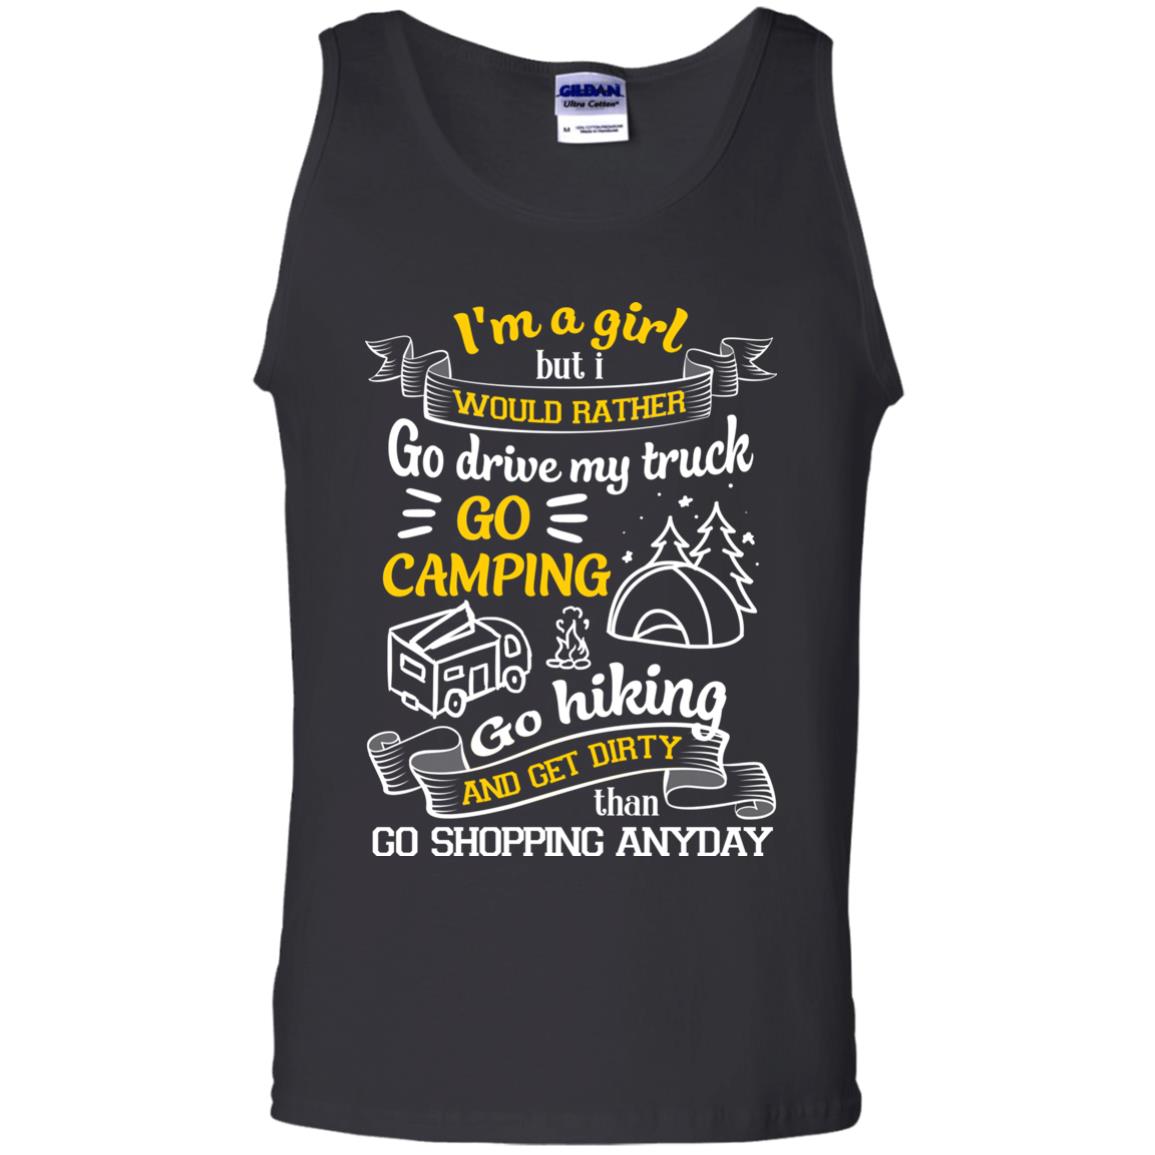 I_m A Girl But I Would Rather Go Drive My Truck Go Camping Go Hiking And Get Dirty Than Go Shopping AnydayG220 Gildan 100% Cotton Tank Top